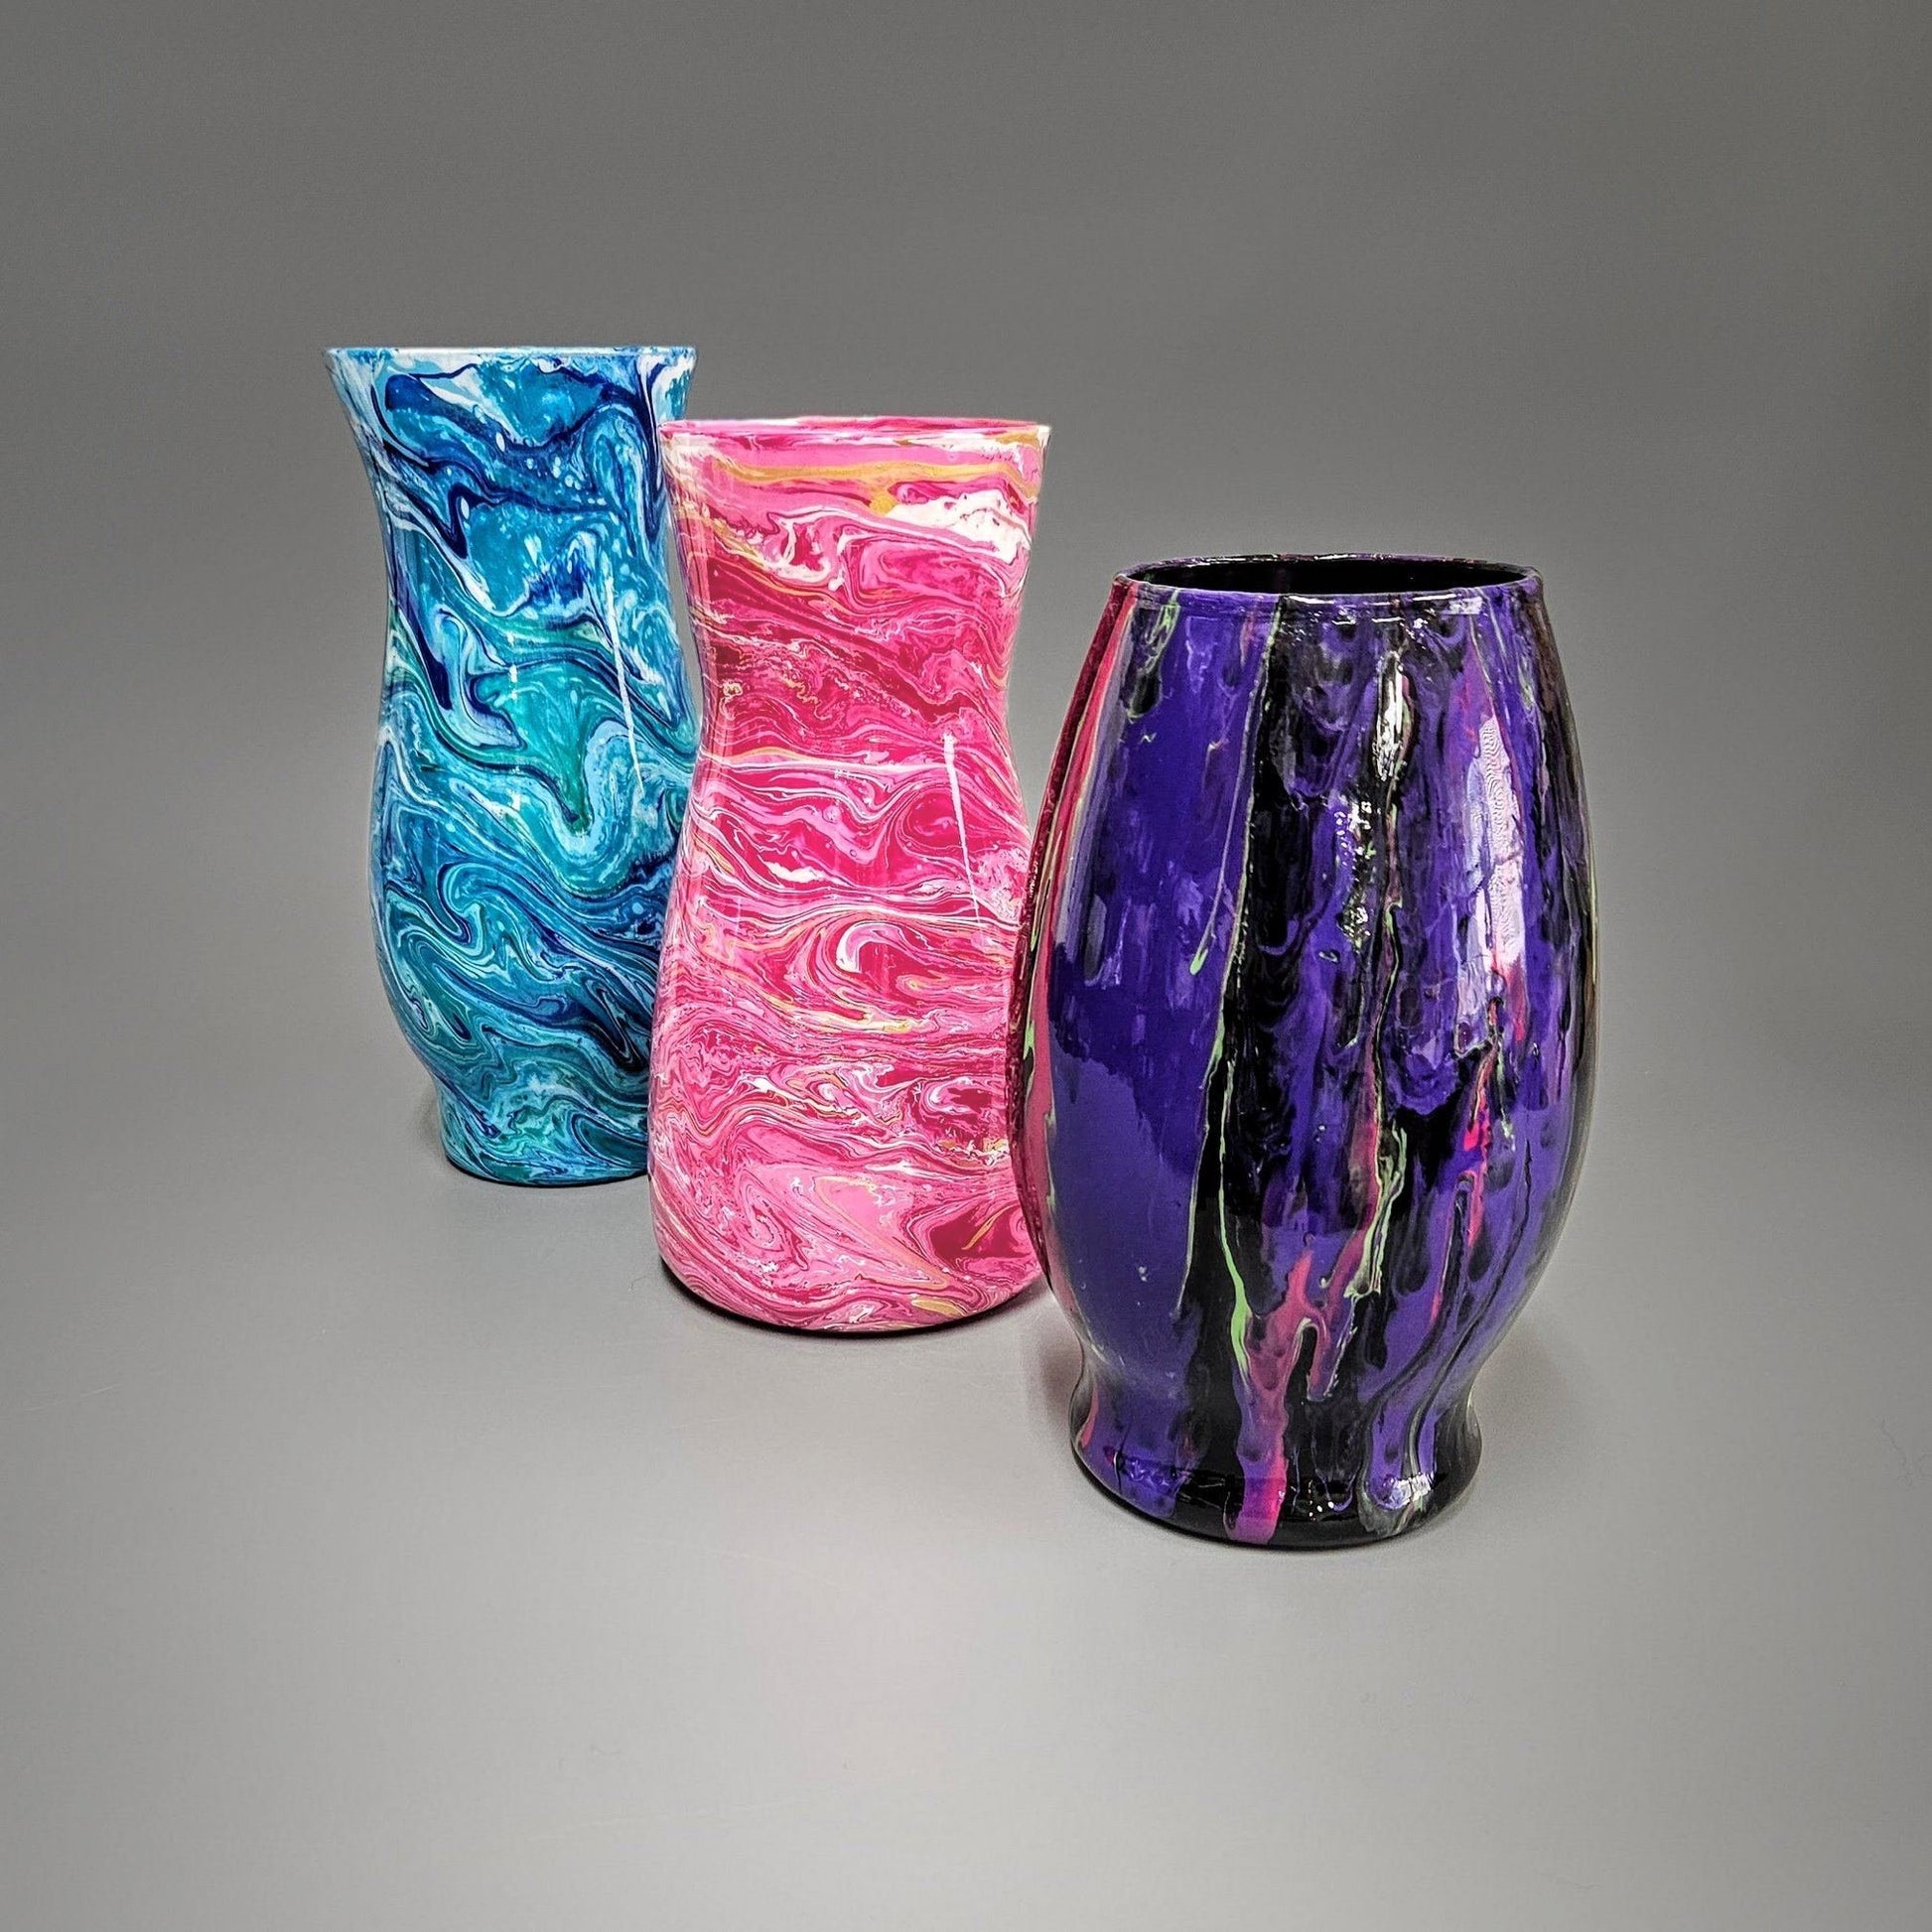 Glass Art Painted Vases in Blue Pink and Purple | Acrylic Pour Fluid Art